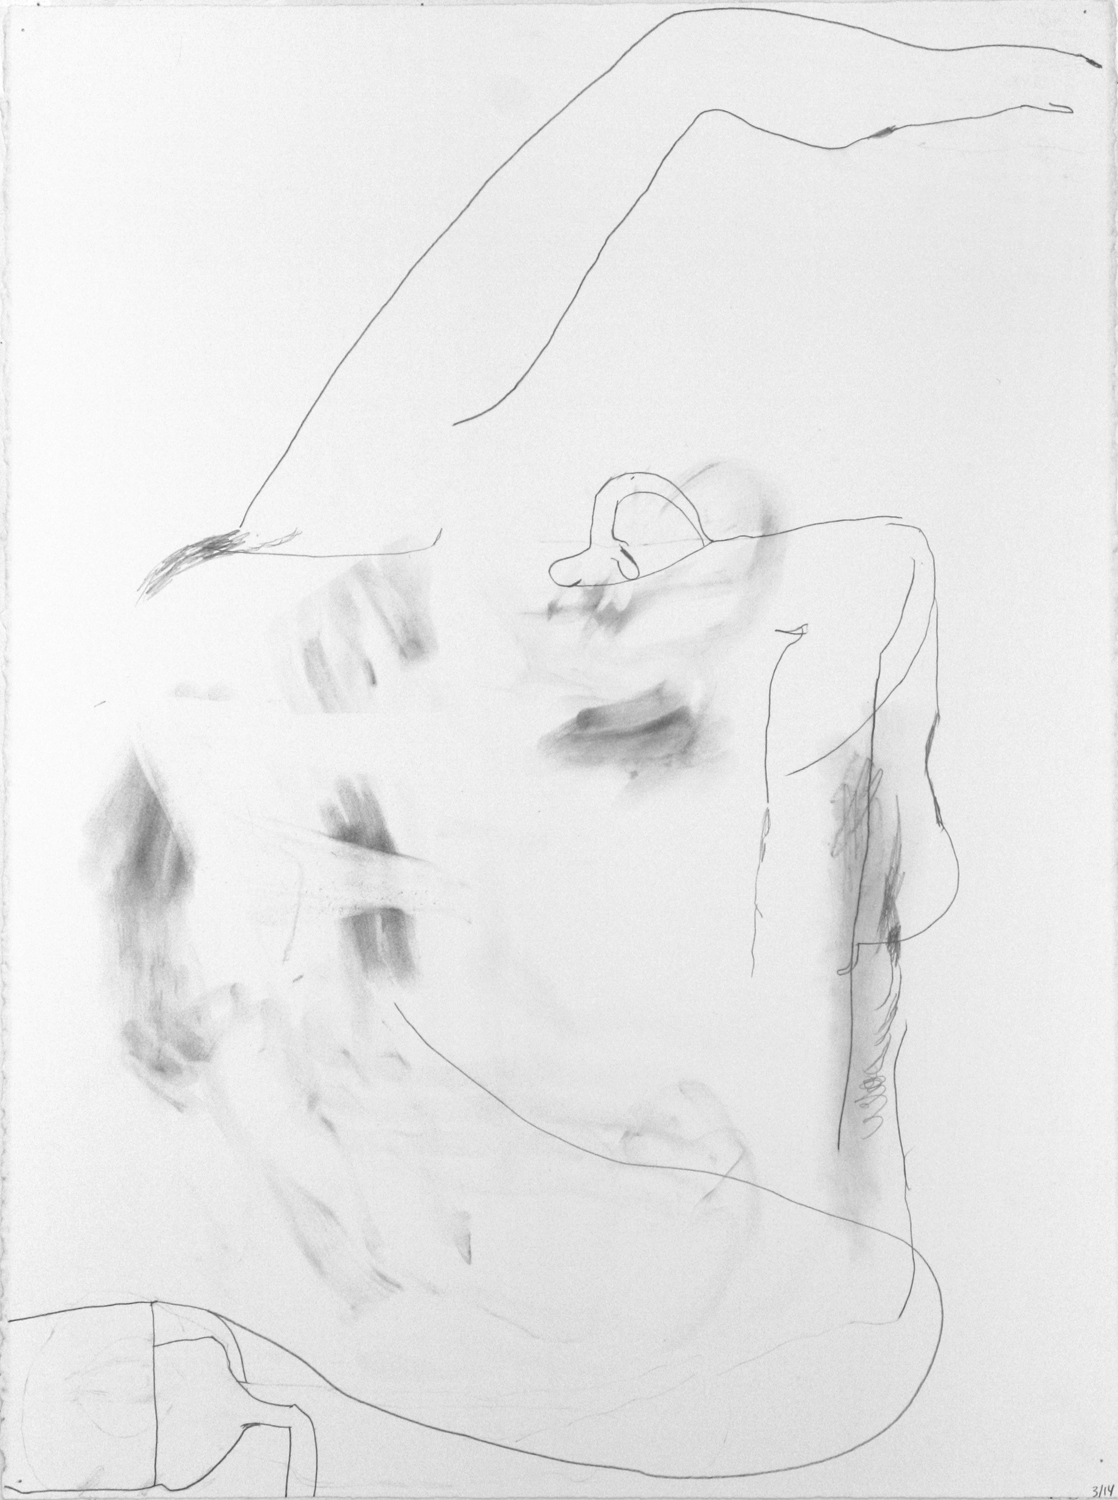  Untitled, 2014. 30" x 22", pencil on paper. 